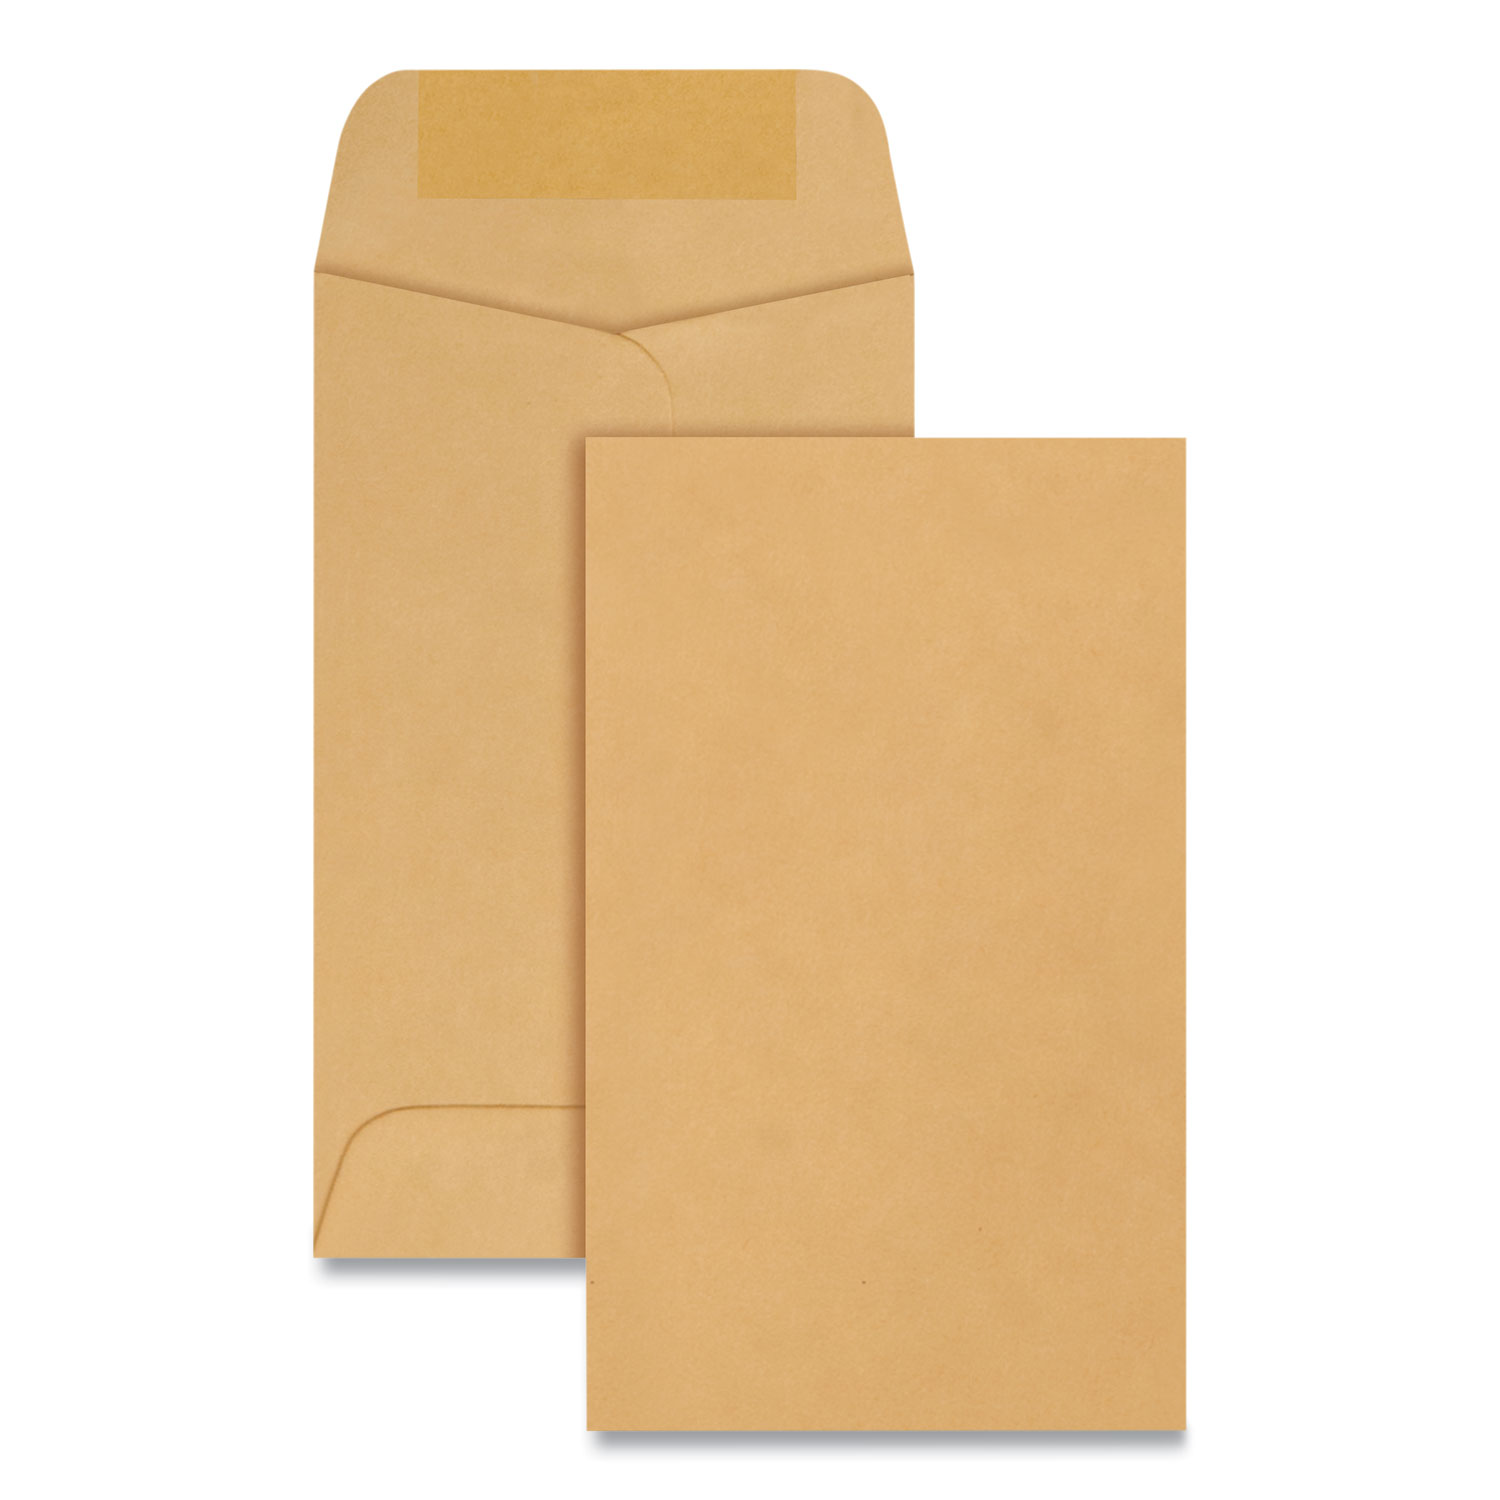 Kraft Coin And Small Parts Envelope 3 Round Flap Gummed Closure 2 5 X 4 25 Brown Kraft